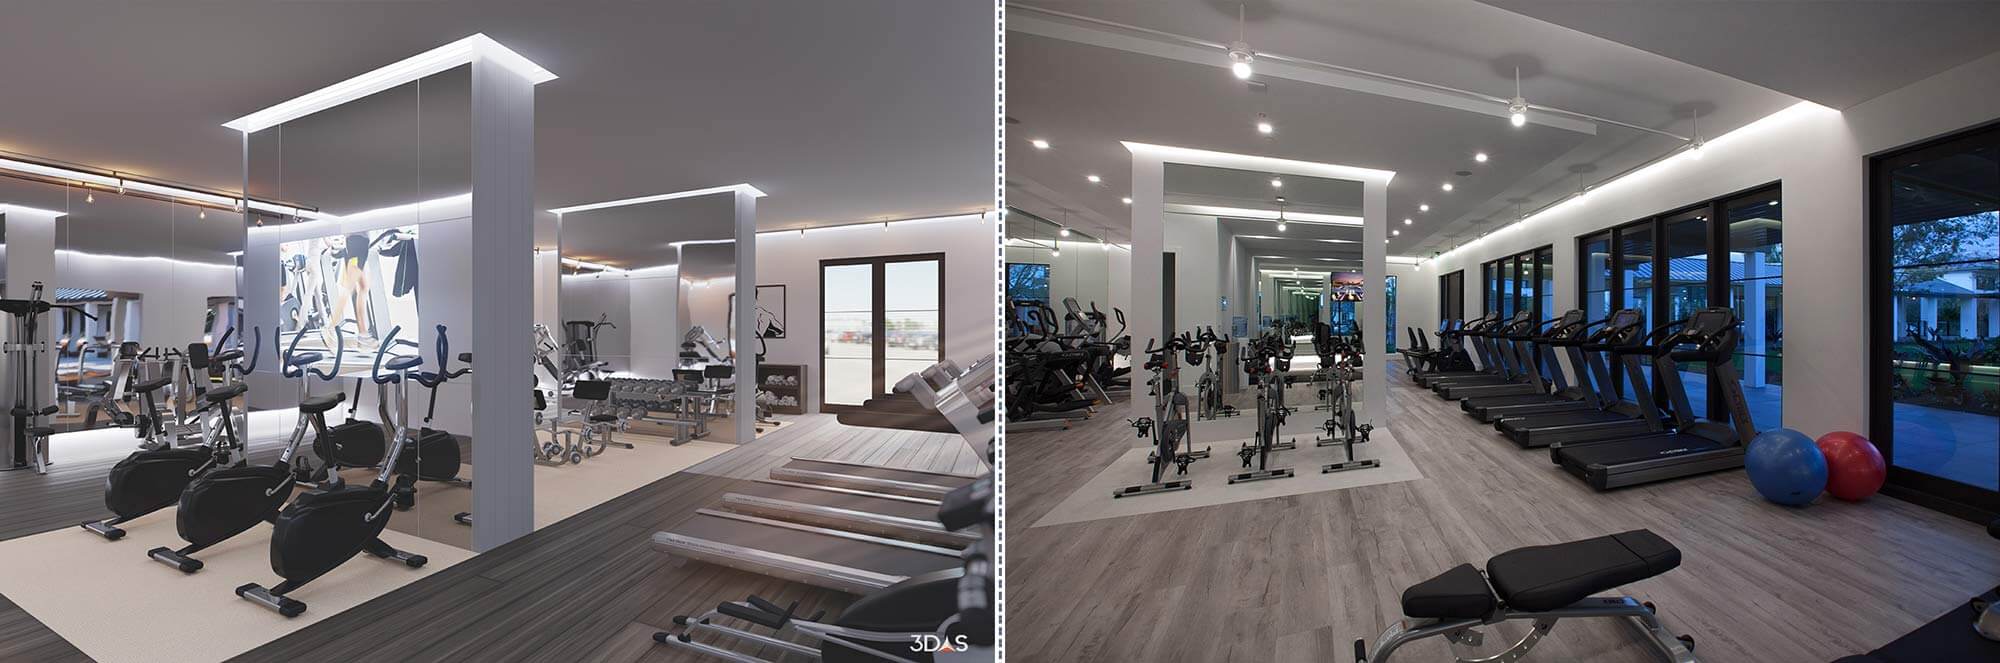 Kalea Bay 3D Rendering (Left) and Photo (Right)